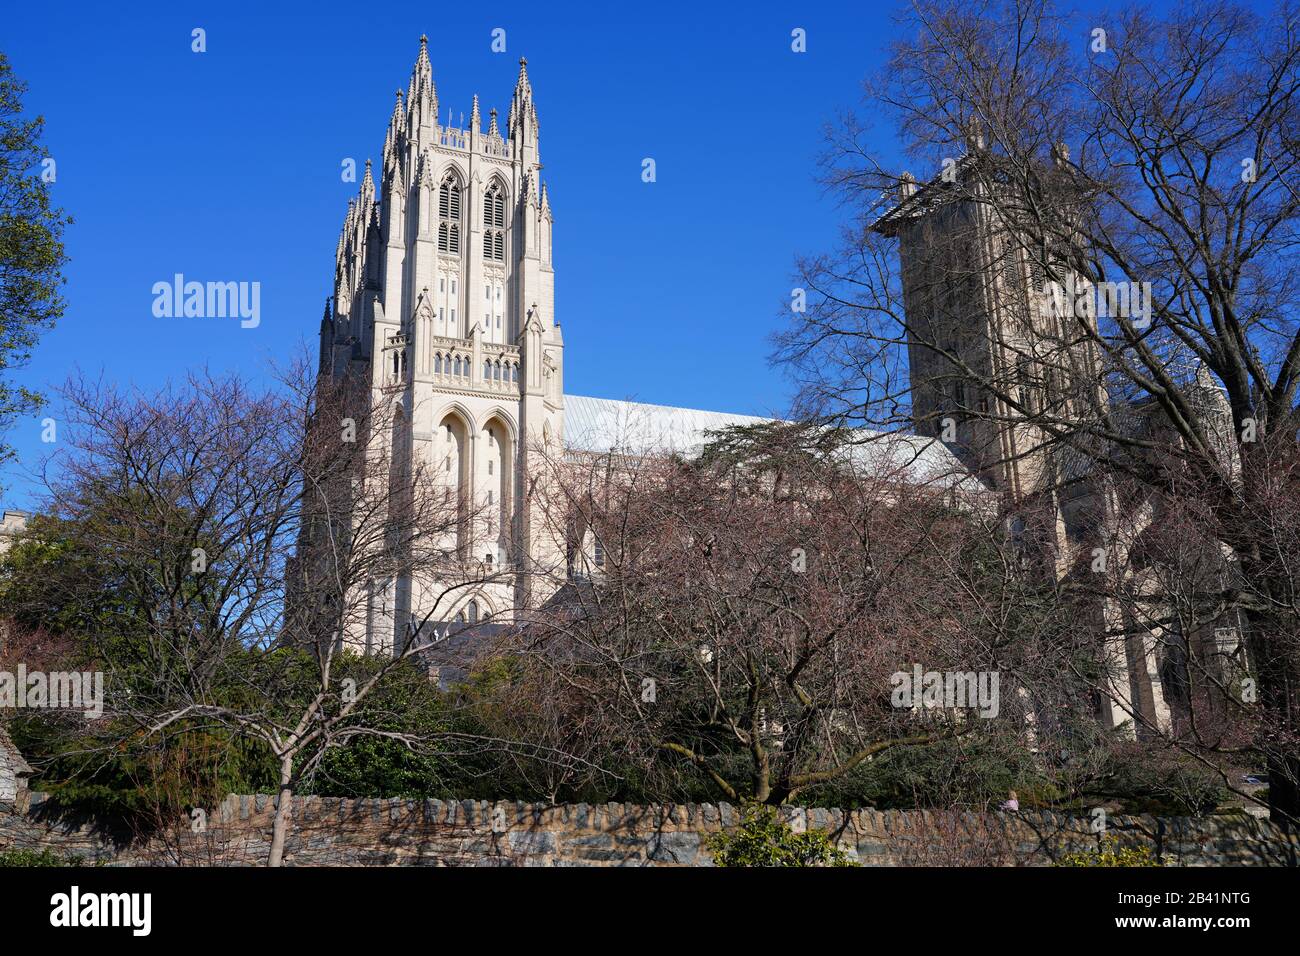 WASHINGTON, DC -23 FEB 2020- View of the Cathedral Church of Saint Peter and Saint Paul in the City and Diocese of Washington (Washington National Cat Stock Photo